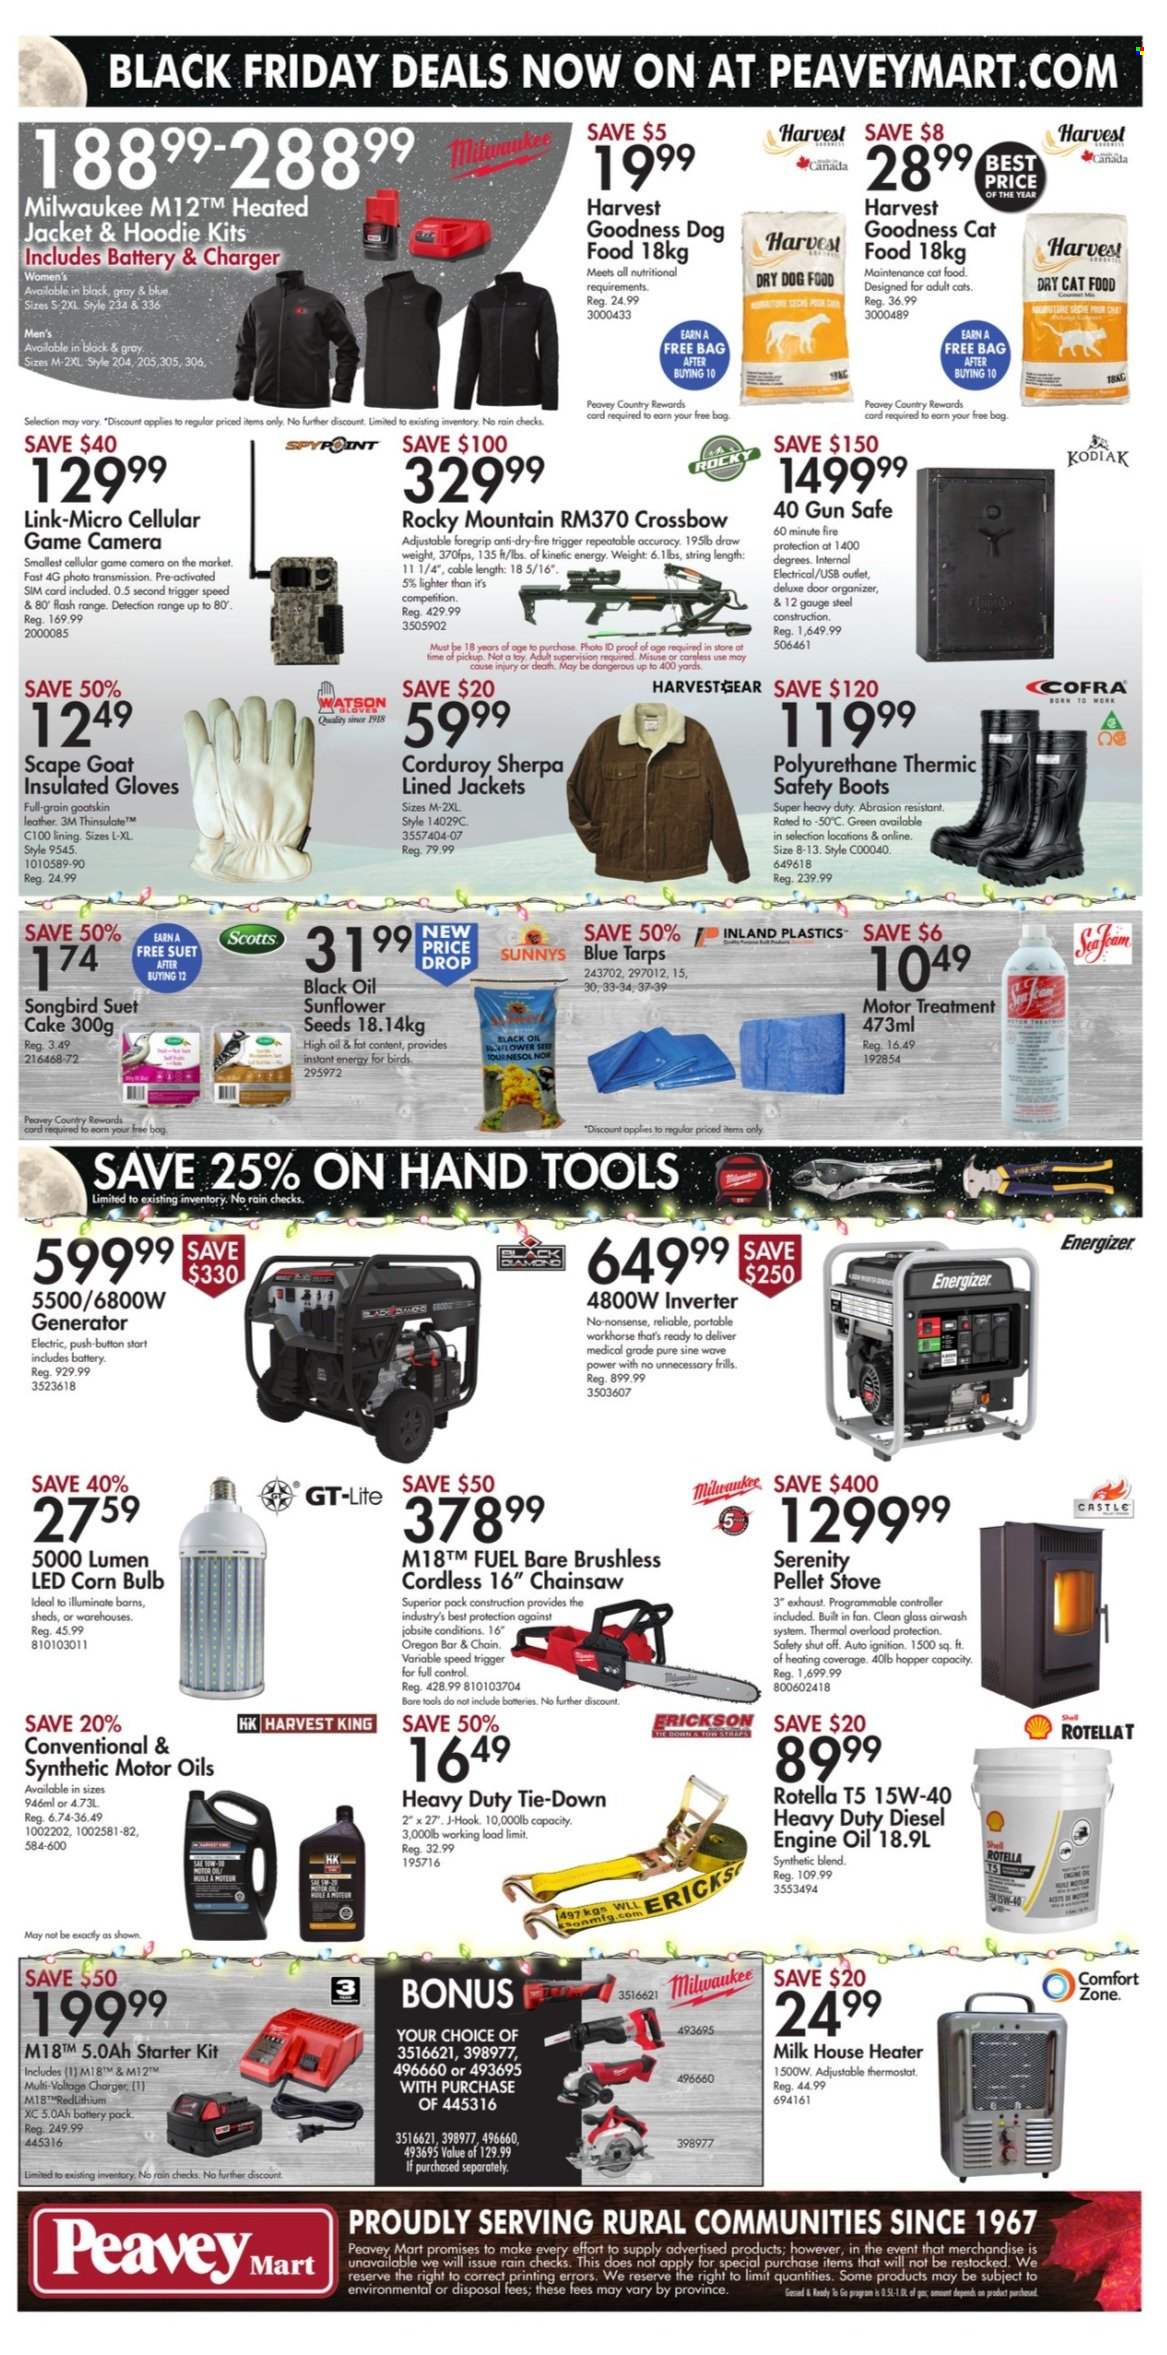 thumbnail - Peavey Mart Flyer - November 24, 2022 - December 01, 2022 - Sales products - bulb, animal food, hoodie, dry dog food, cat food, dog food, suet, sunflower seeds, dry cat food, jacket, sherpa, boots, toys, heater, Milwaukee, chain saw, hand tools, gun safe, generator, plant seeds, motor oil, Rotella, Shell, tarps, pellet gun, Energizer. Page 10.